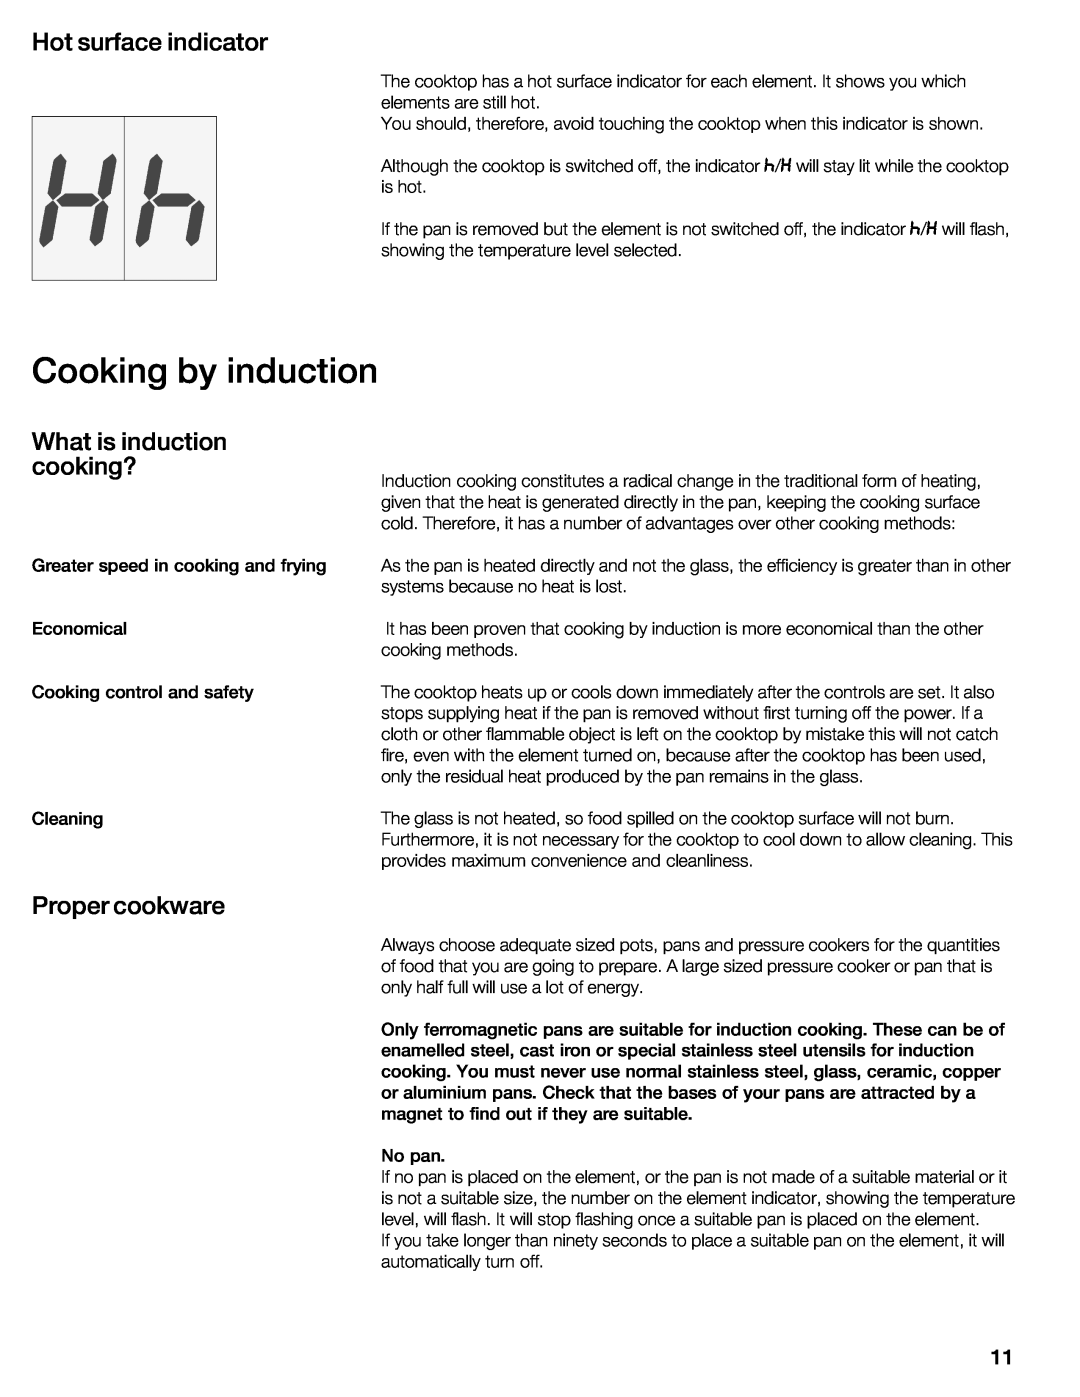 Thermador CIT304E manual Cooking by induction, Hot surface indicator, What is induction cooking?, Proper, cookware 